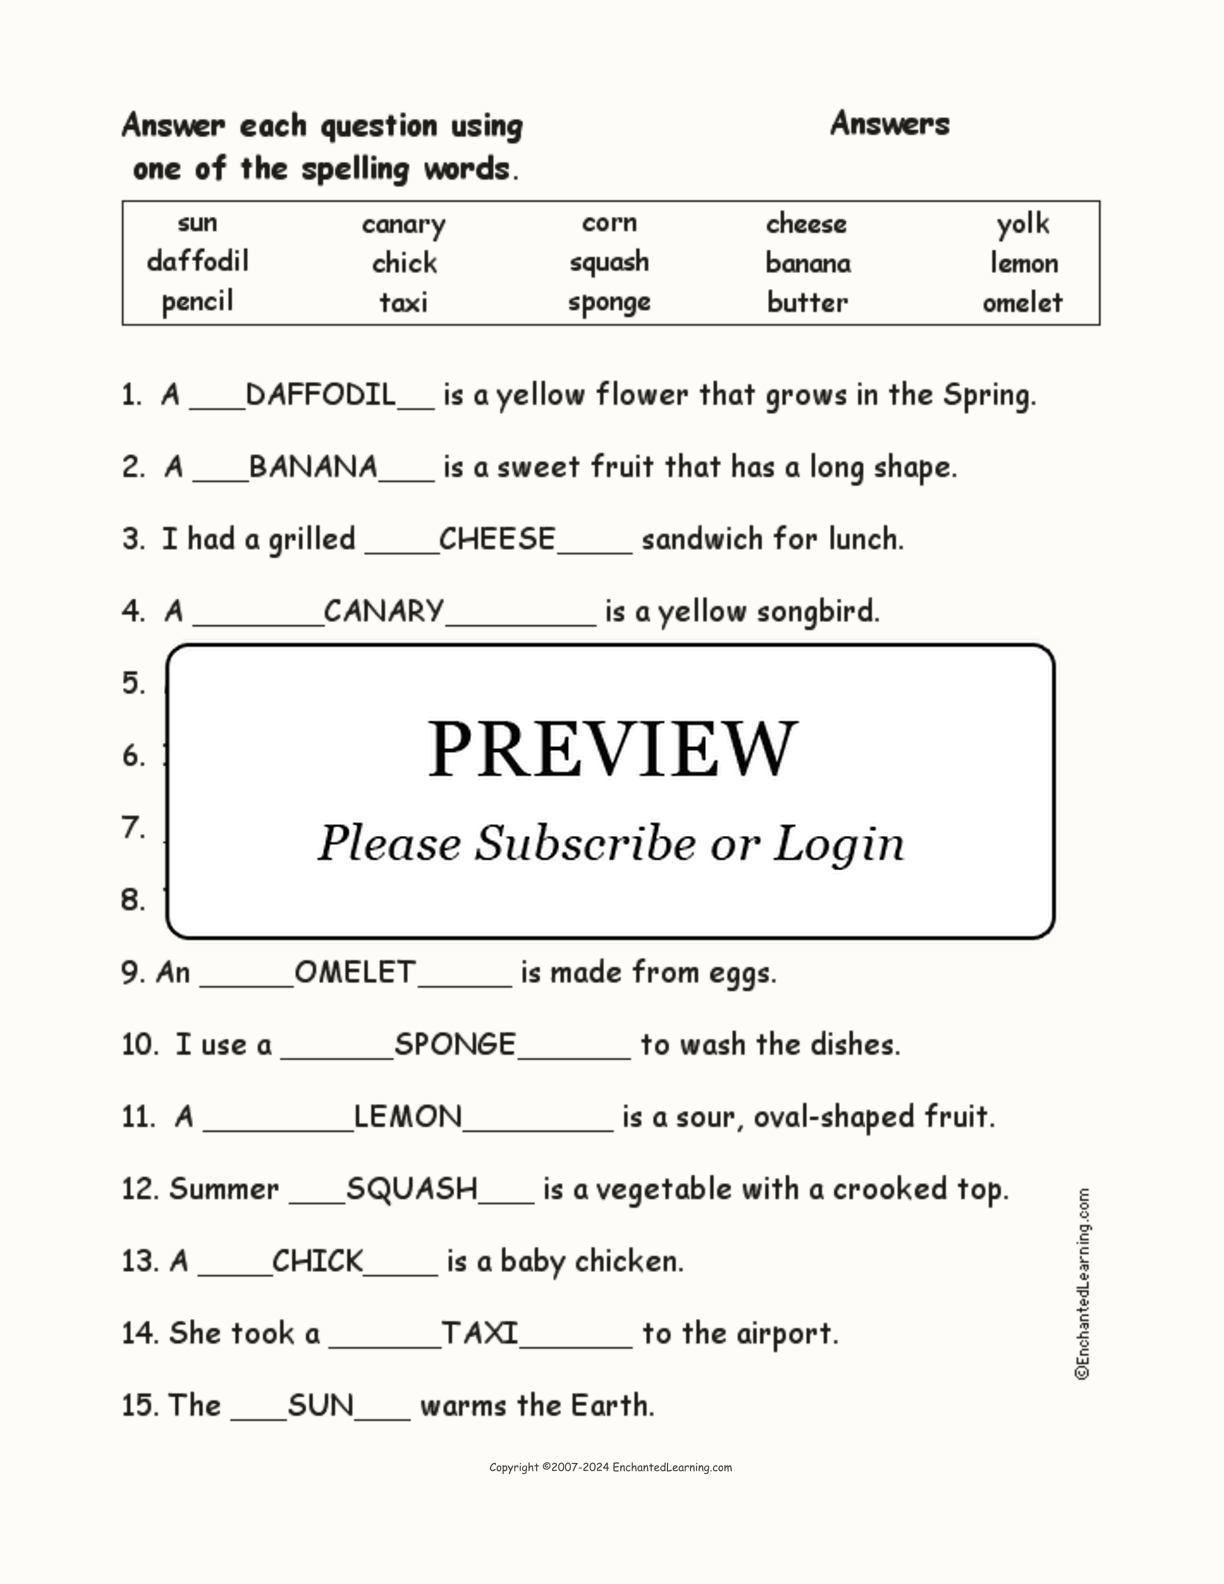 Yellow Things: Spelling Word Questions interactive worksheet page 2